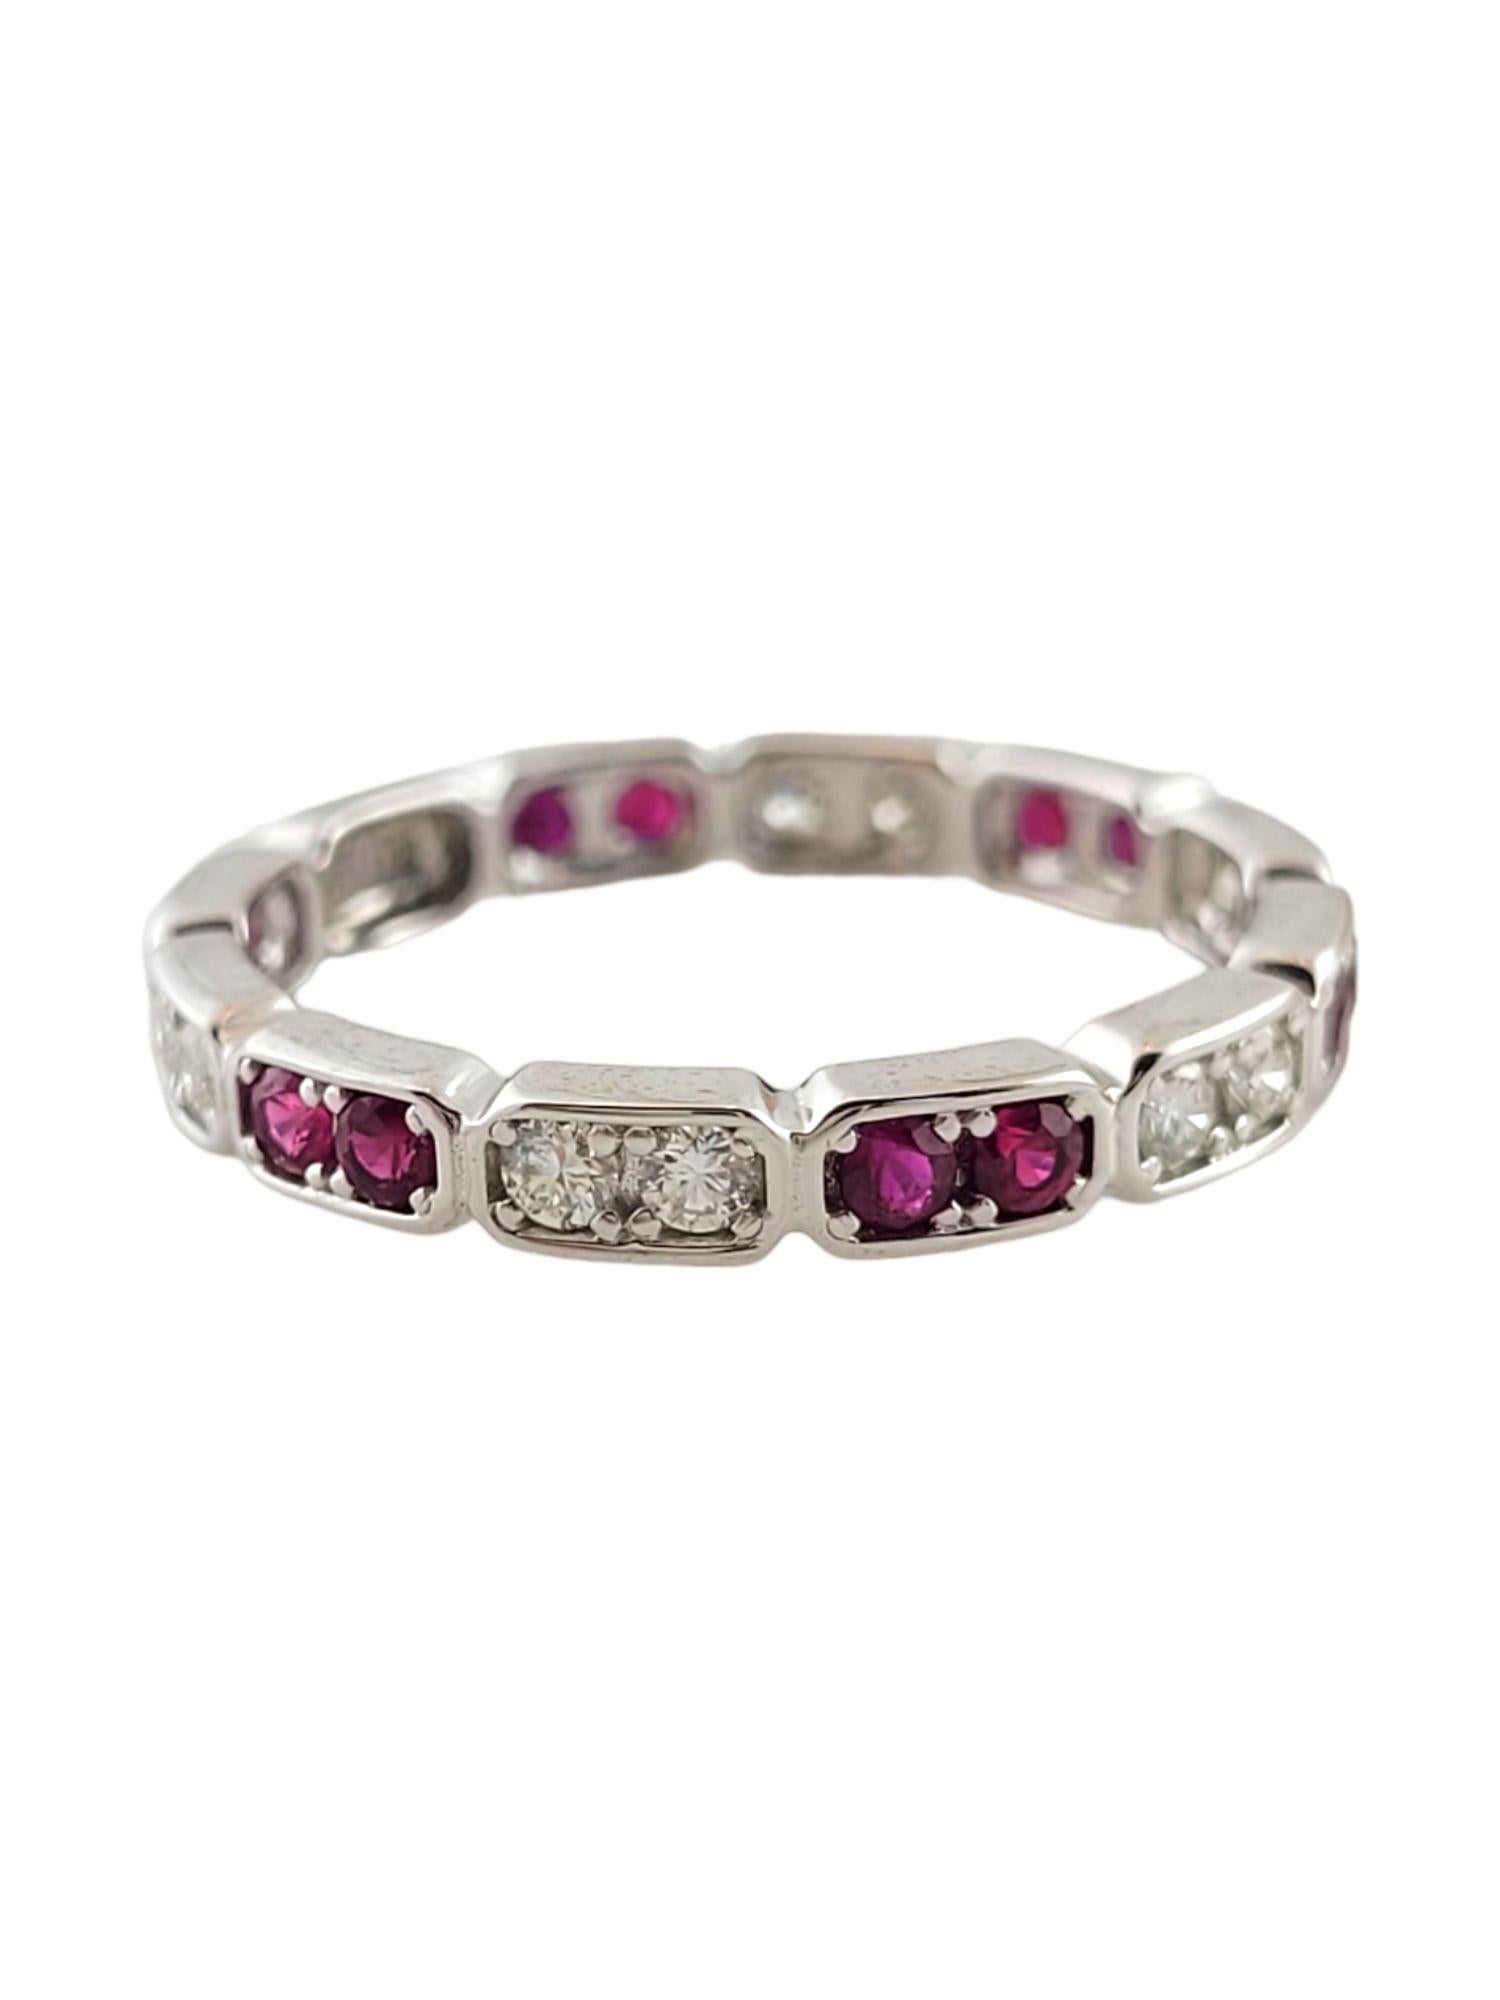 Gorgeous 18K white gold eternity band with 10 round cut, sparkling diamonds and 12 round cut, natural rubies!

Approximate total diamond weight: .27 cttw

Diamond clarity: SI1-SI2

Diamond color: H-I

.43cts in natural rubies.

Ring size: